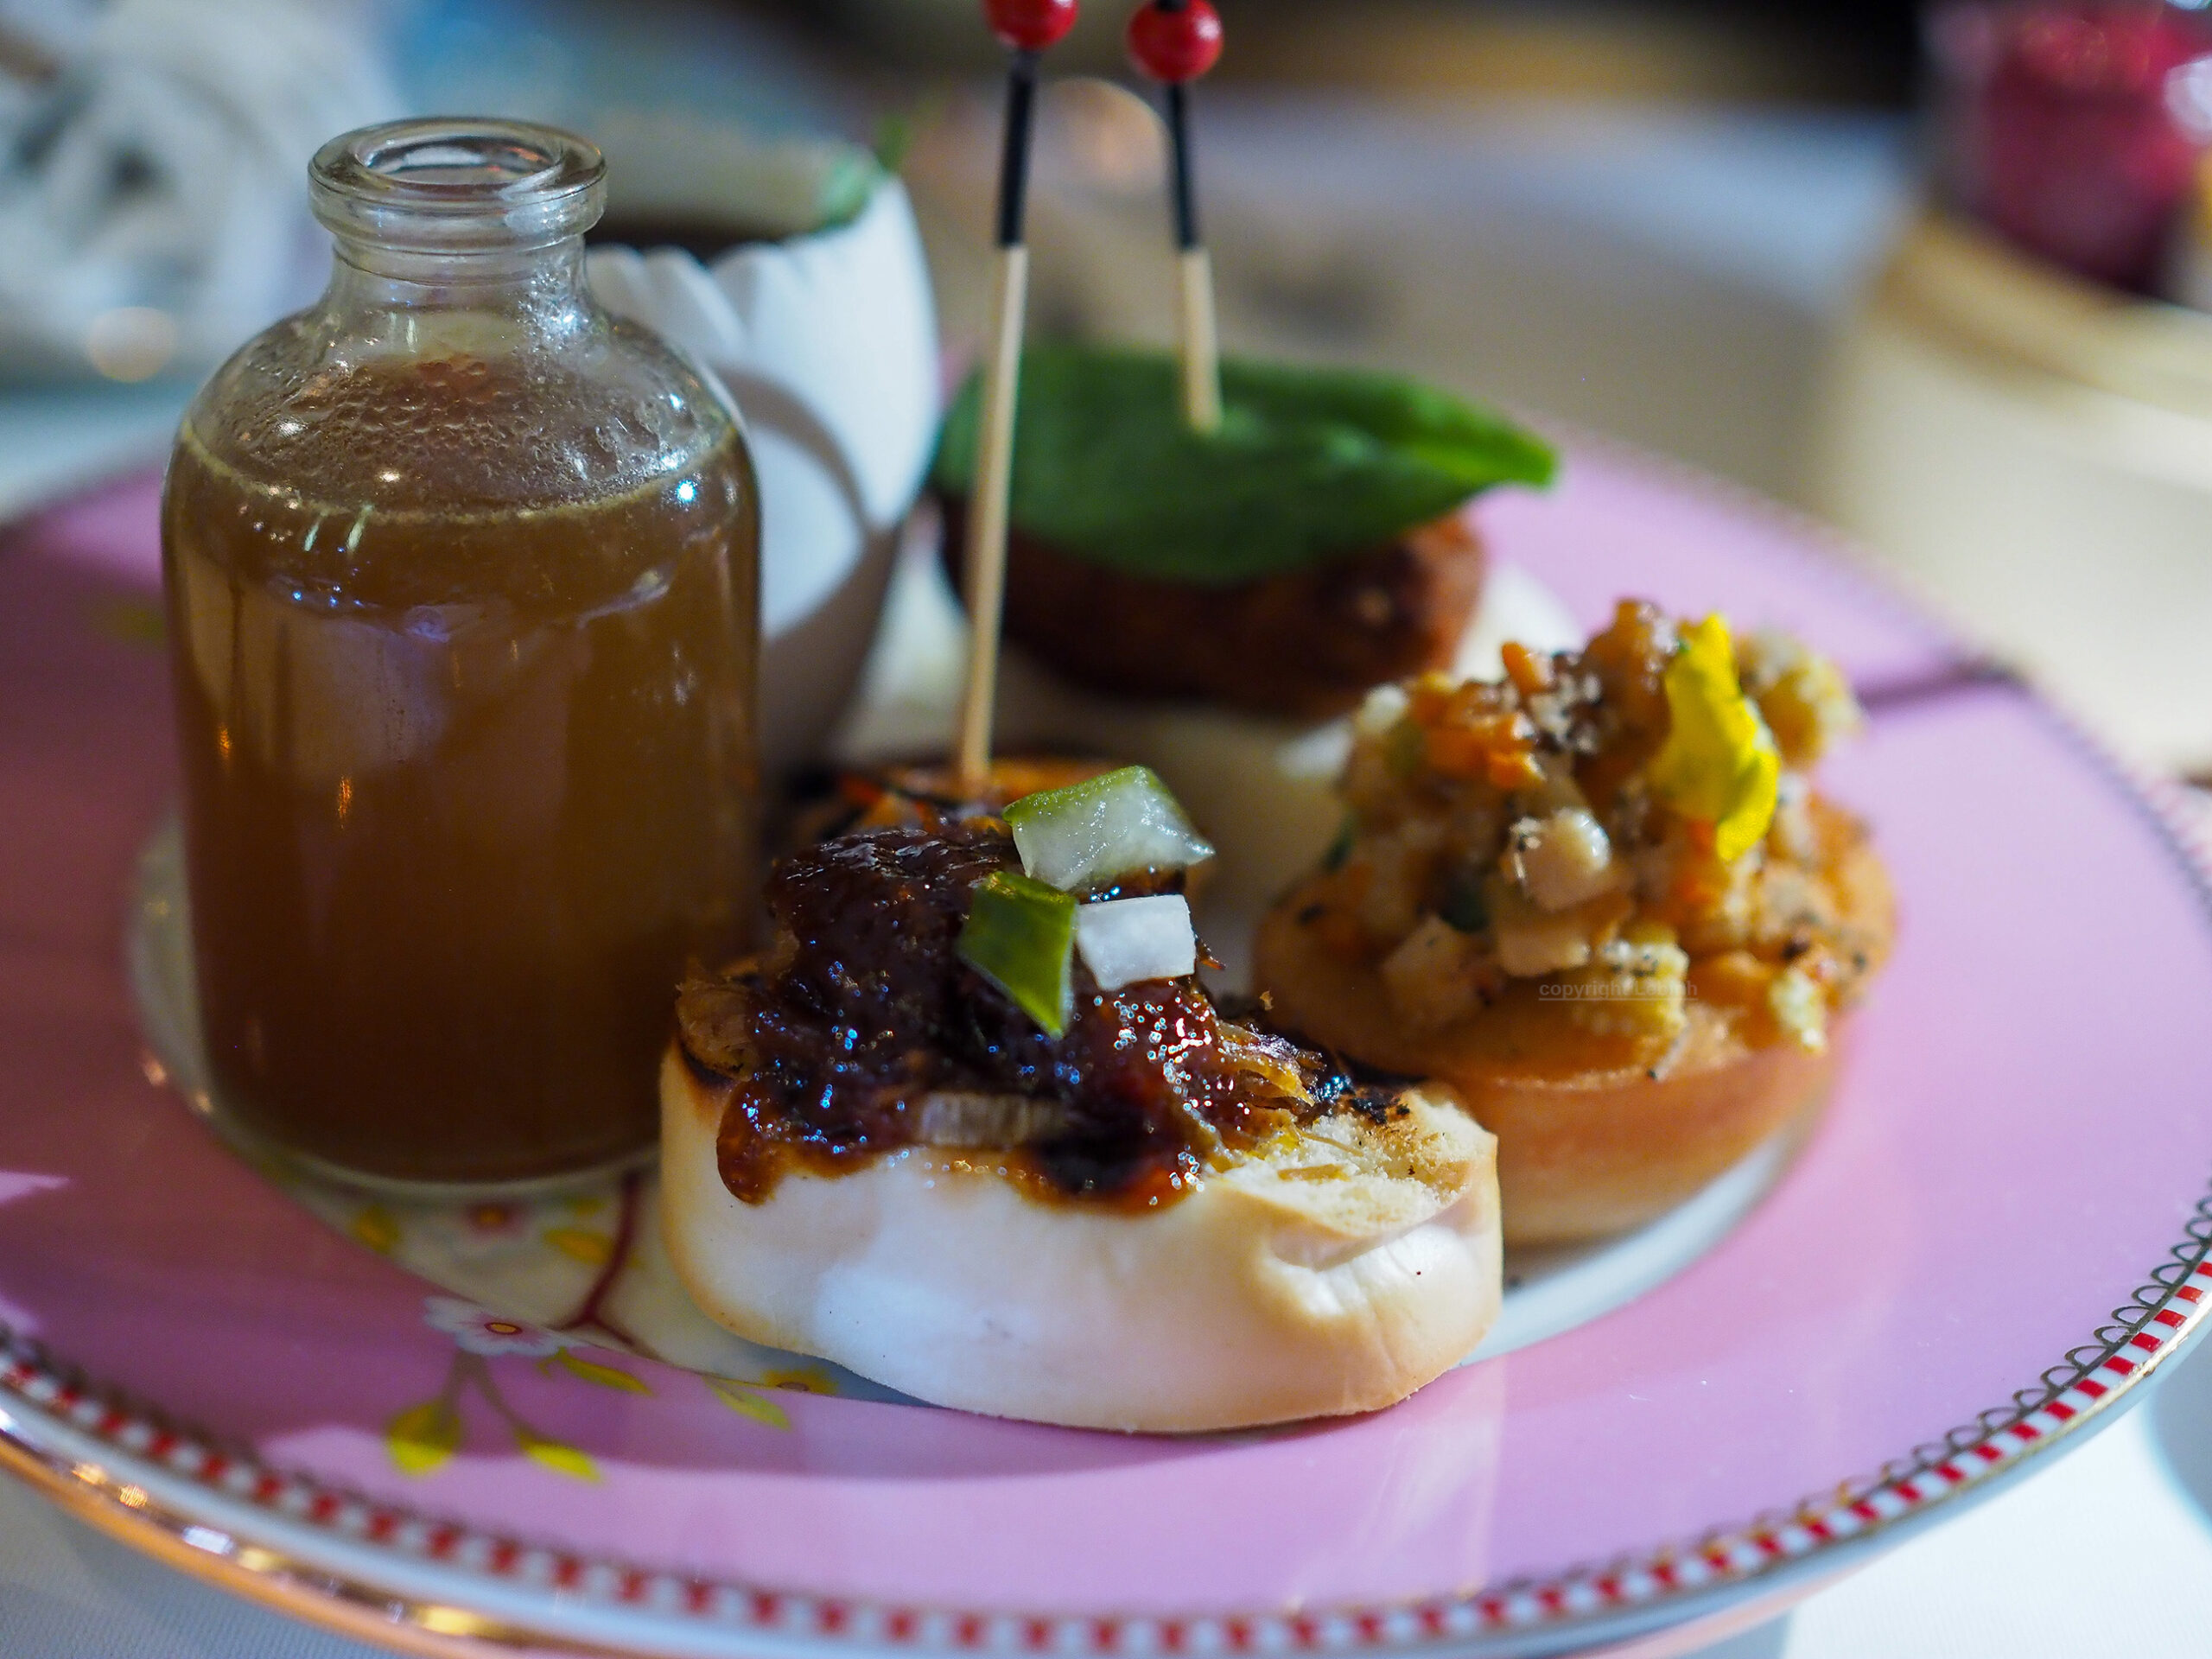 Chai’ Bao Sliders, bao with crispy duck, bao chopped vegetables, prawns on toast, Chinese tea egg, and finally the potion of ‘eternal youth’